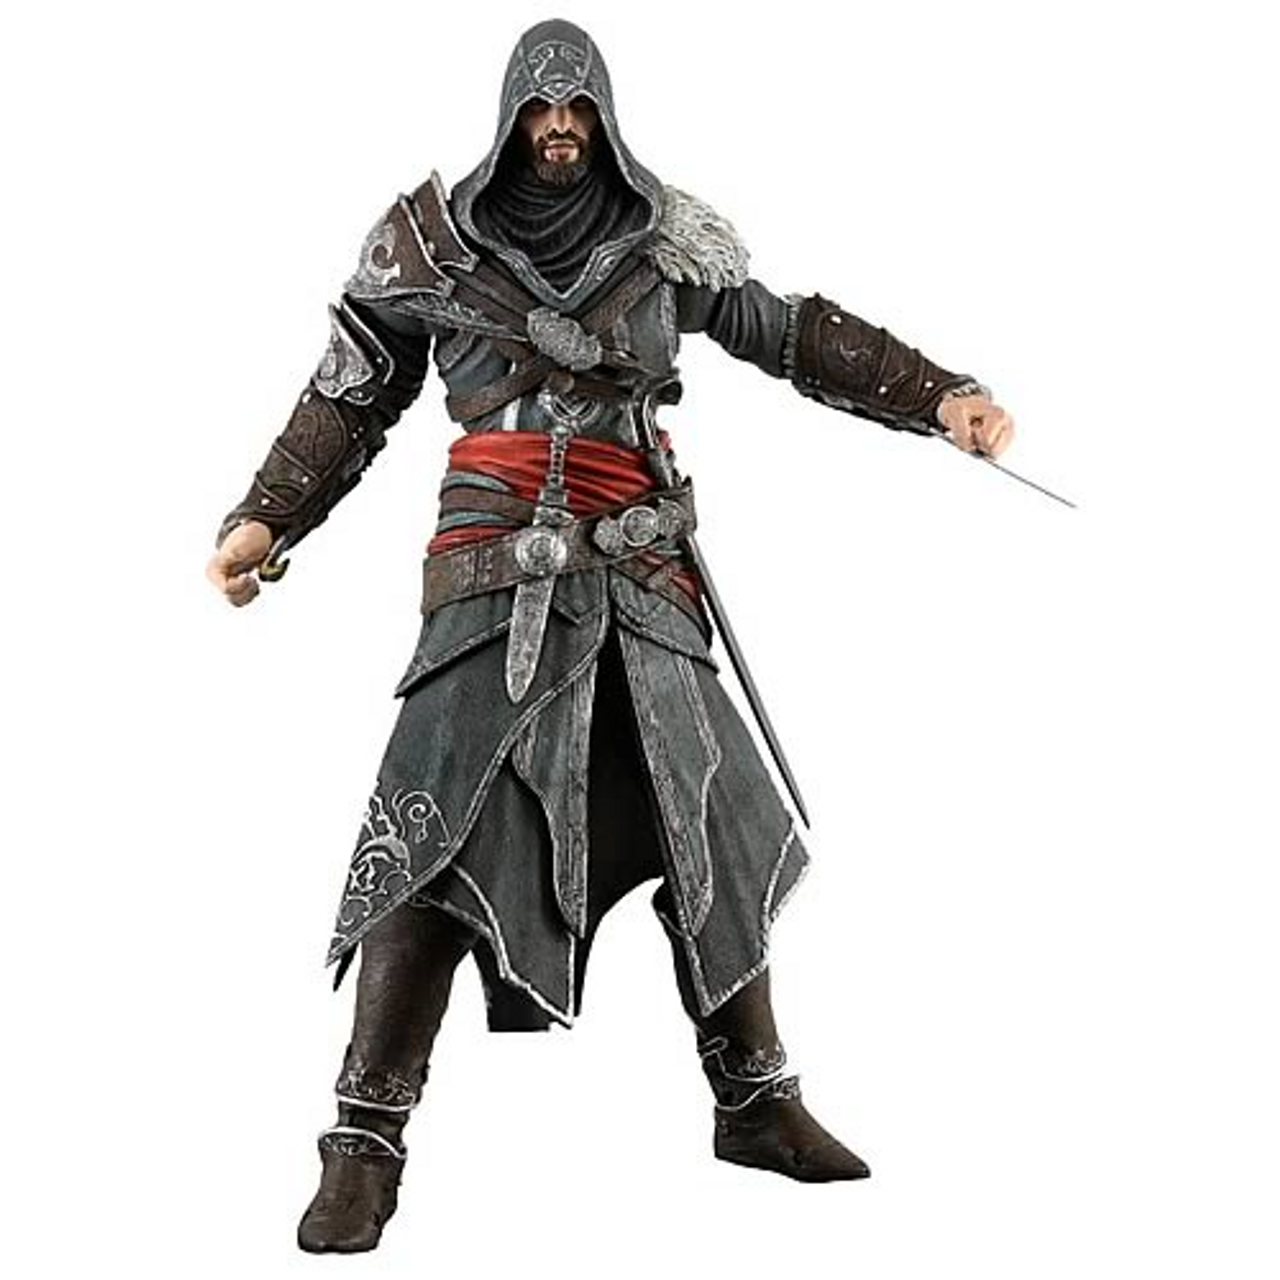  McFarlane Toys Assassin's Creed Connor 7 Collectible